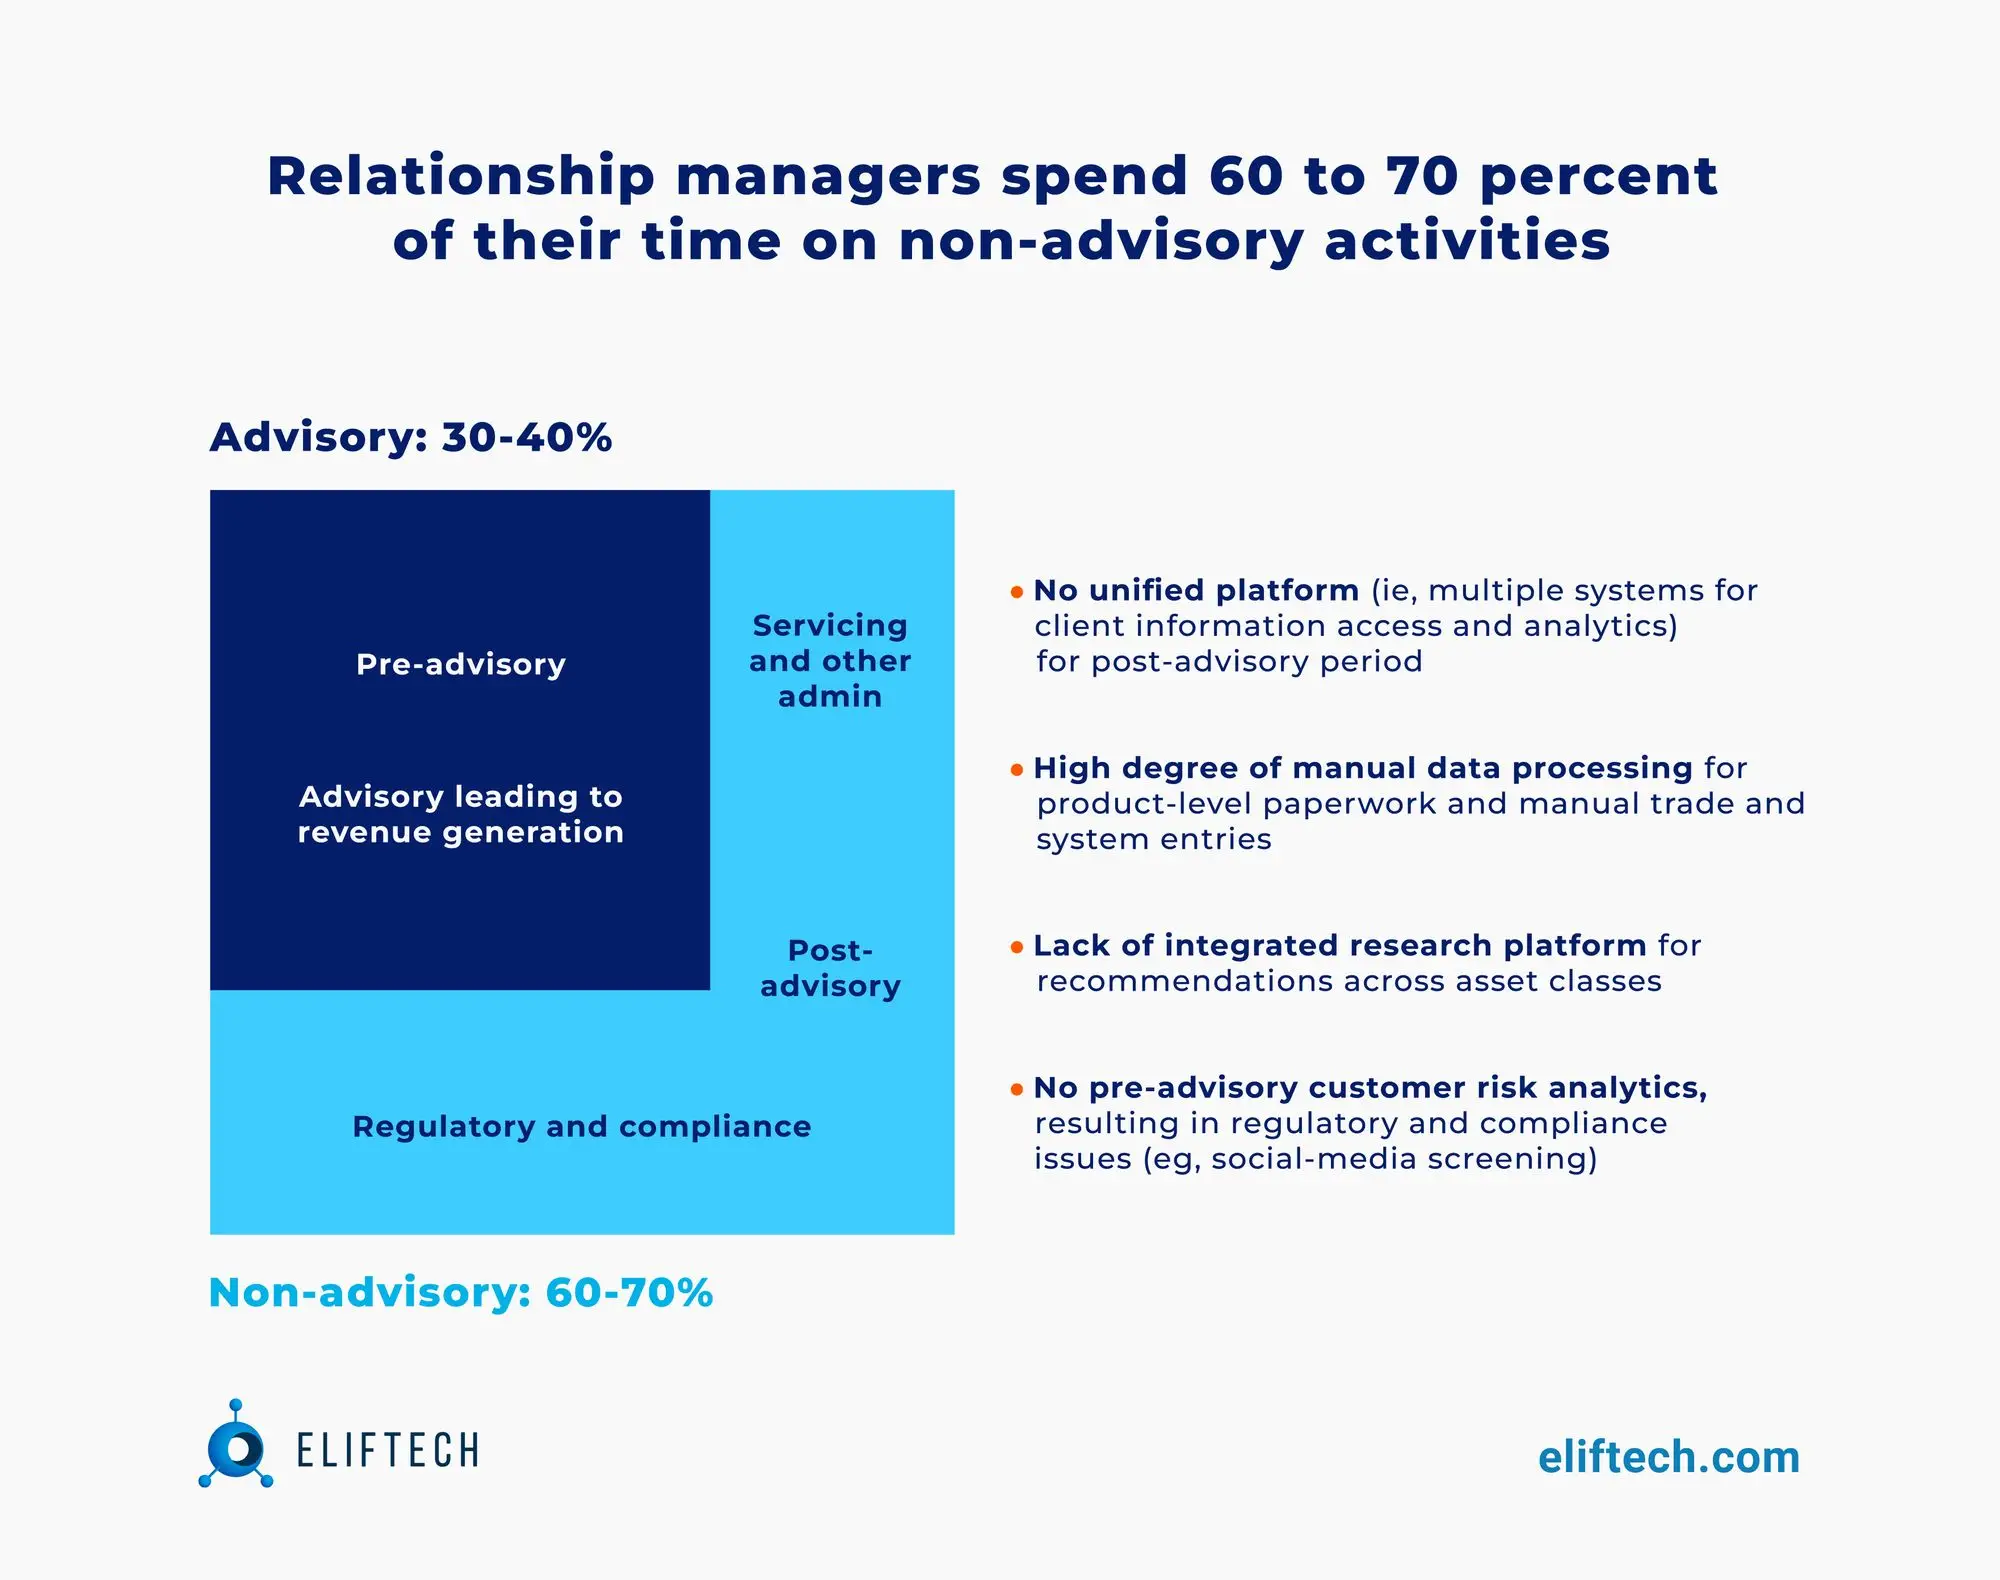 Relationship managers spend 60-70% of their time on non-revenue tasks